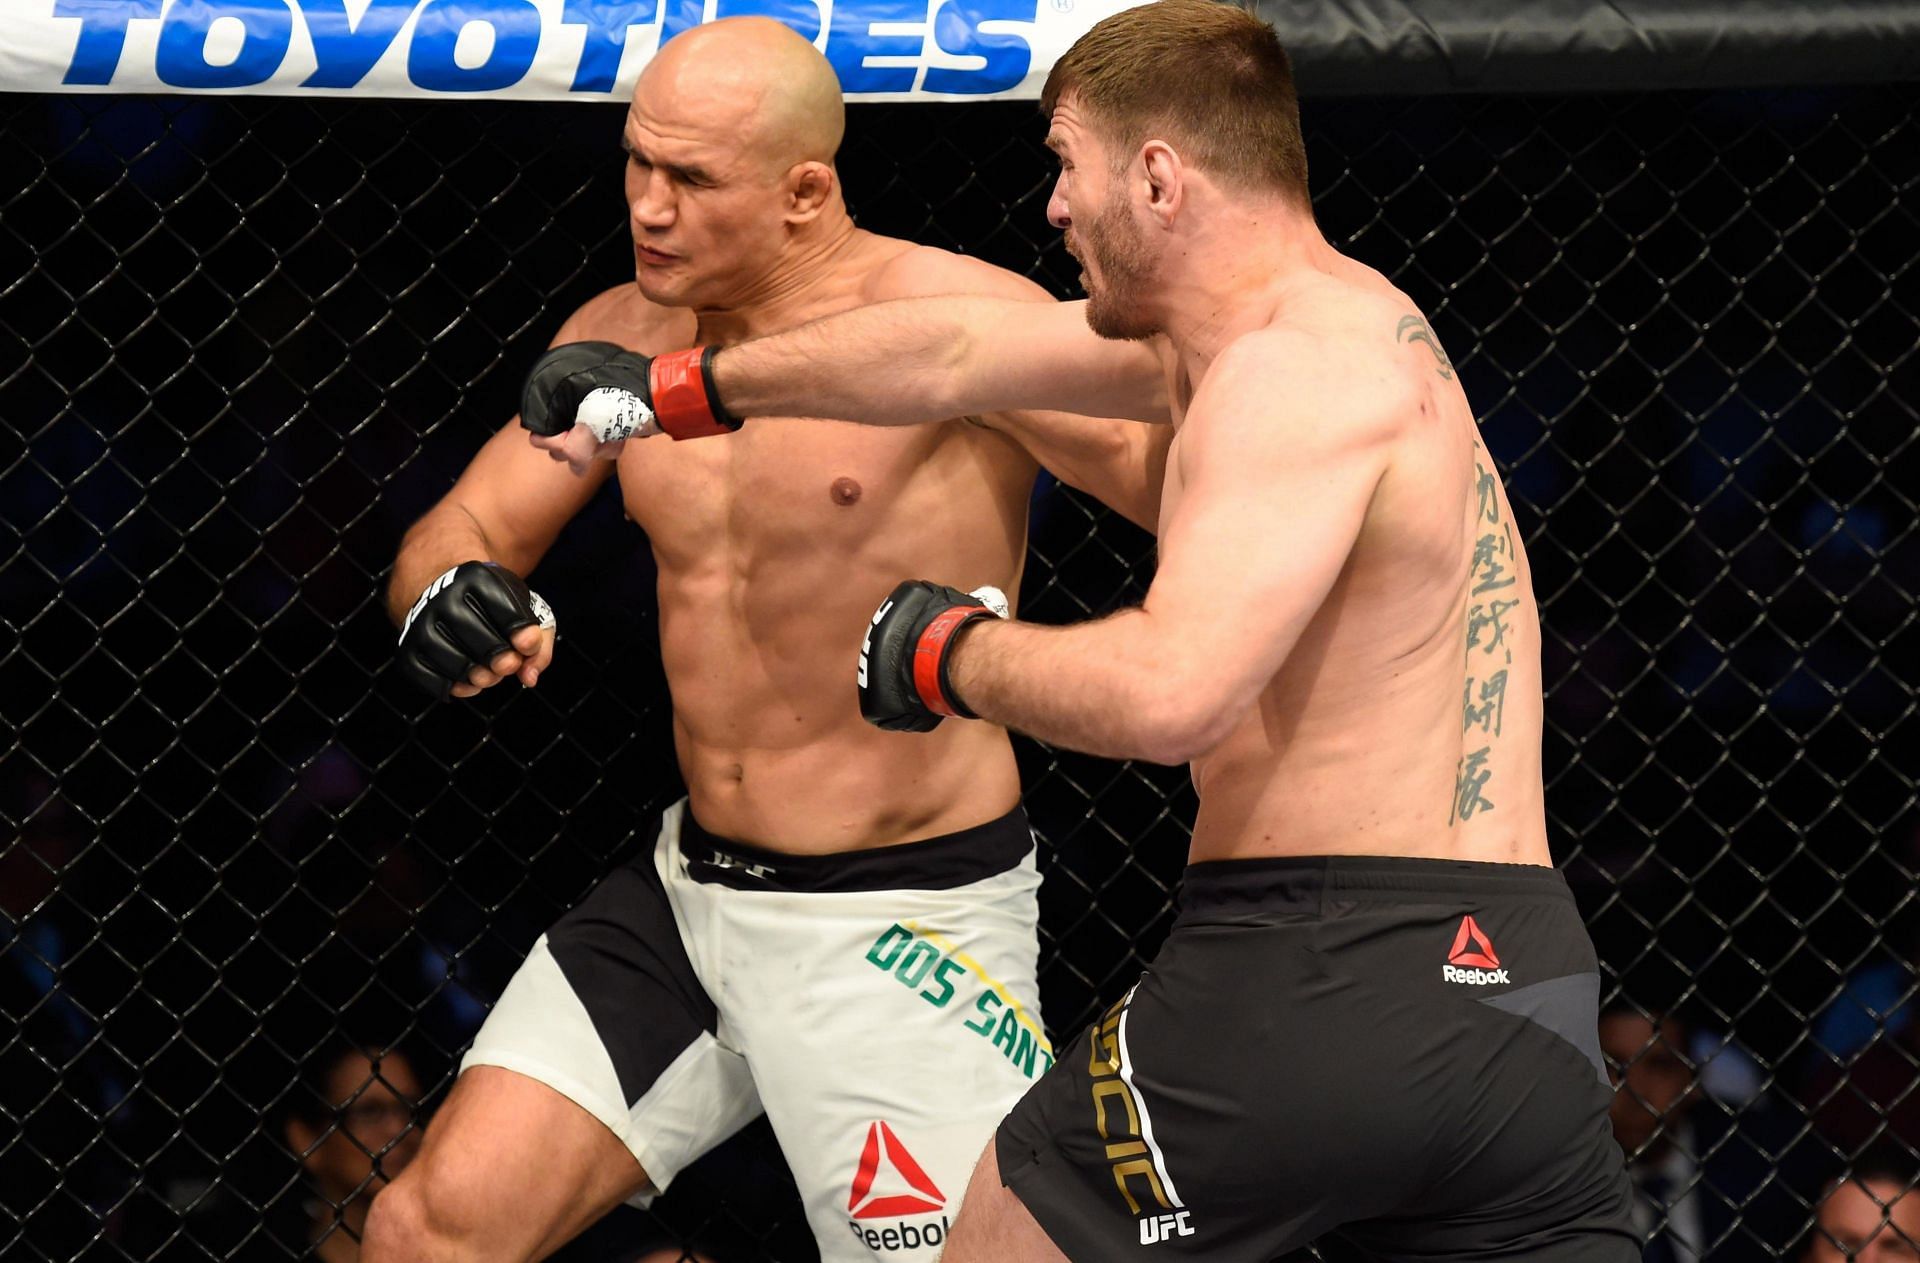 Stipe Miocic utterly crushed Junior Dos Santos to claim some vengeance for his earlier loss to the Brazilian